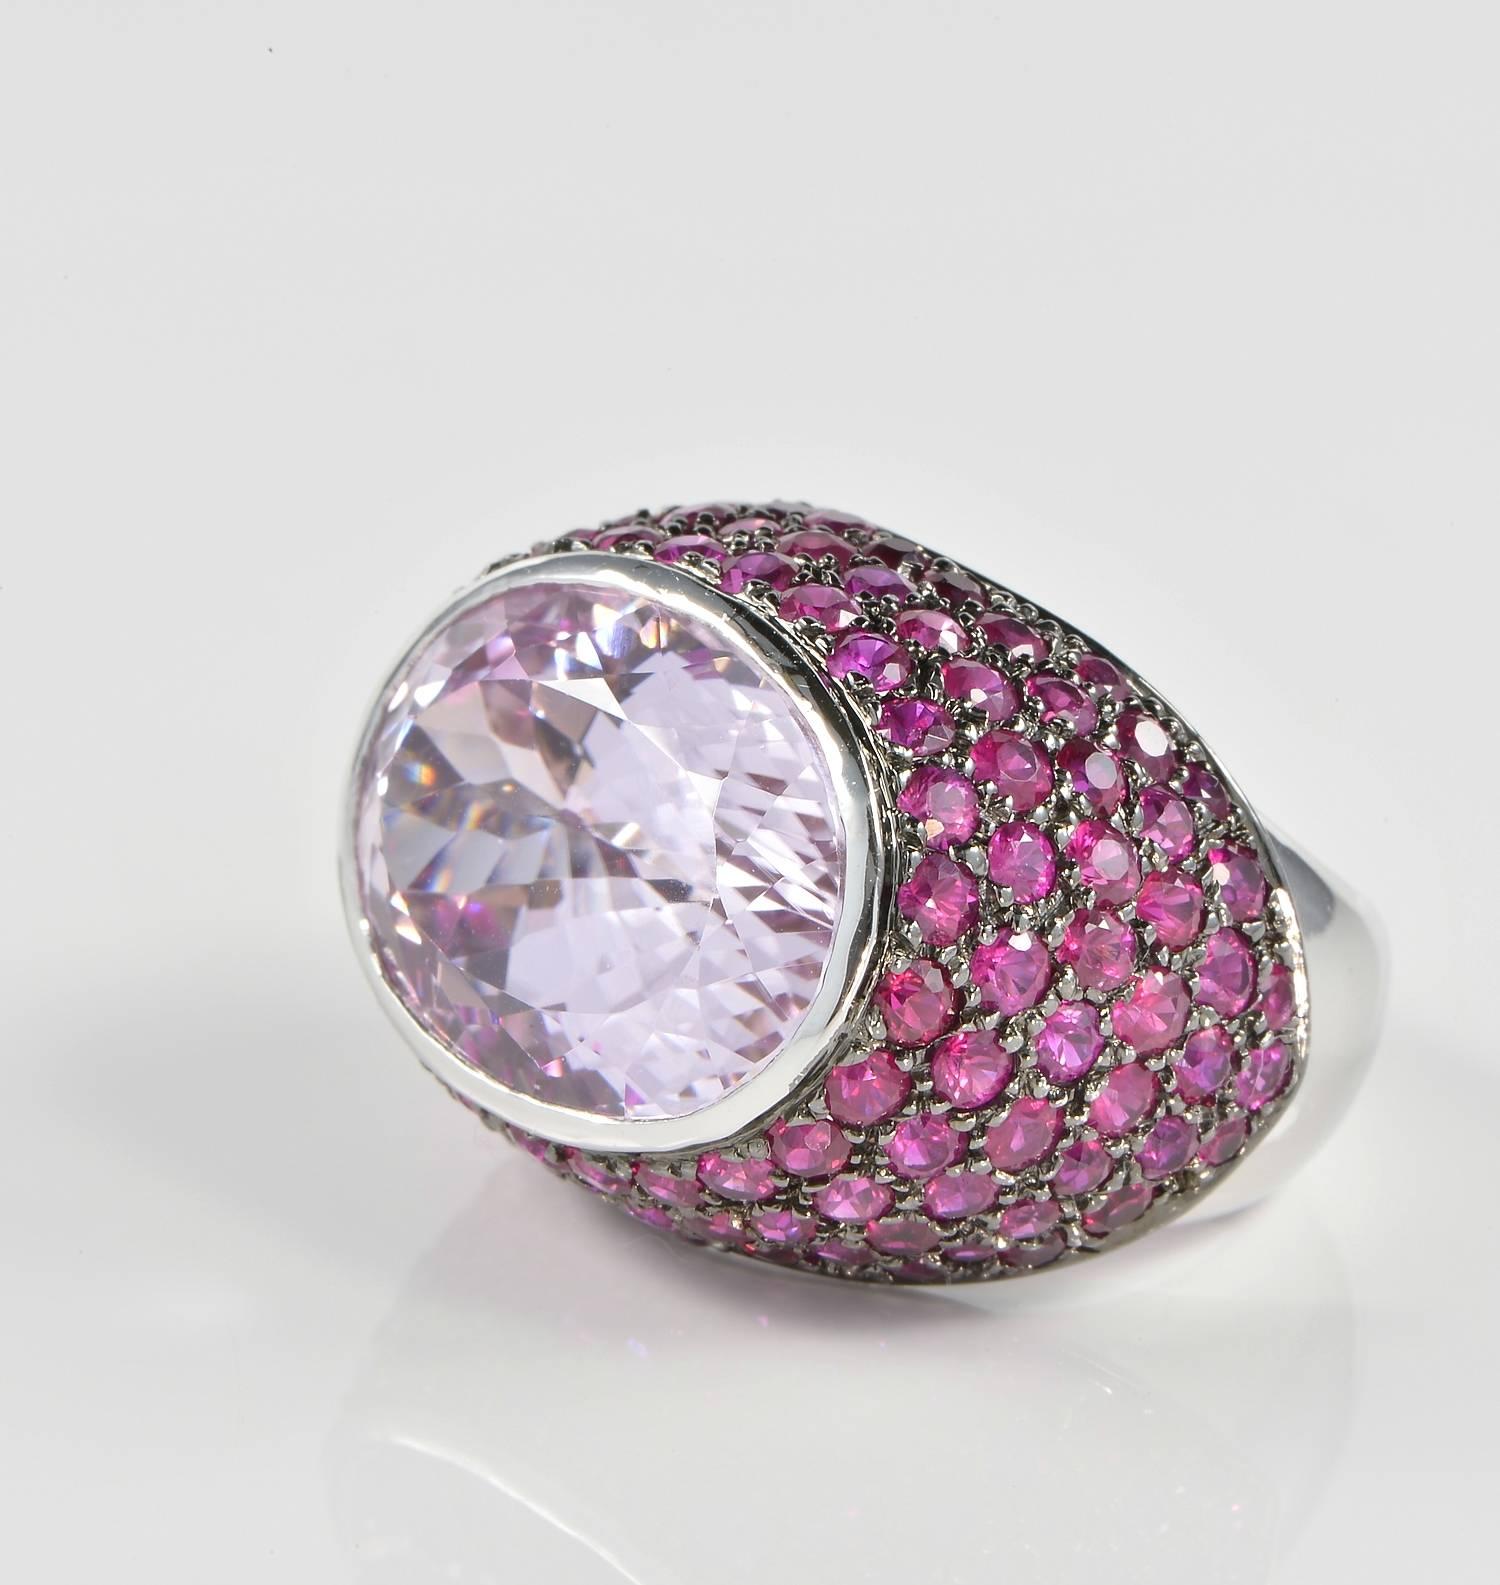 Fabulous 18.0 Carat Kunzite 5.0 Carat Ruby Contemporary Ring In Excellent Condition For Sale In Napoli, IT